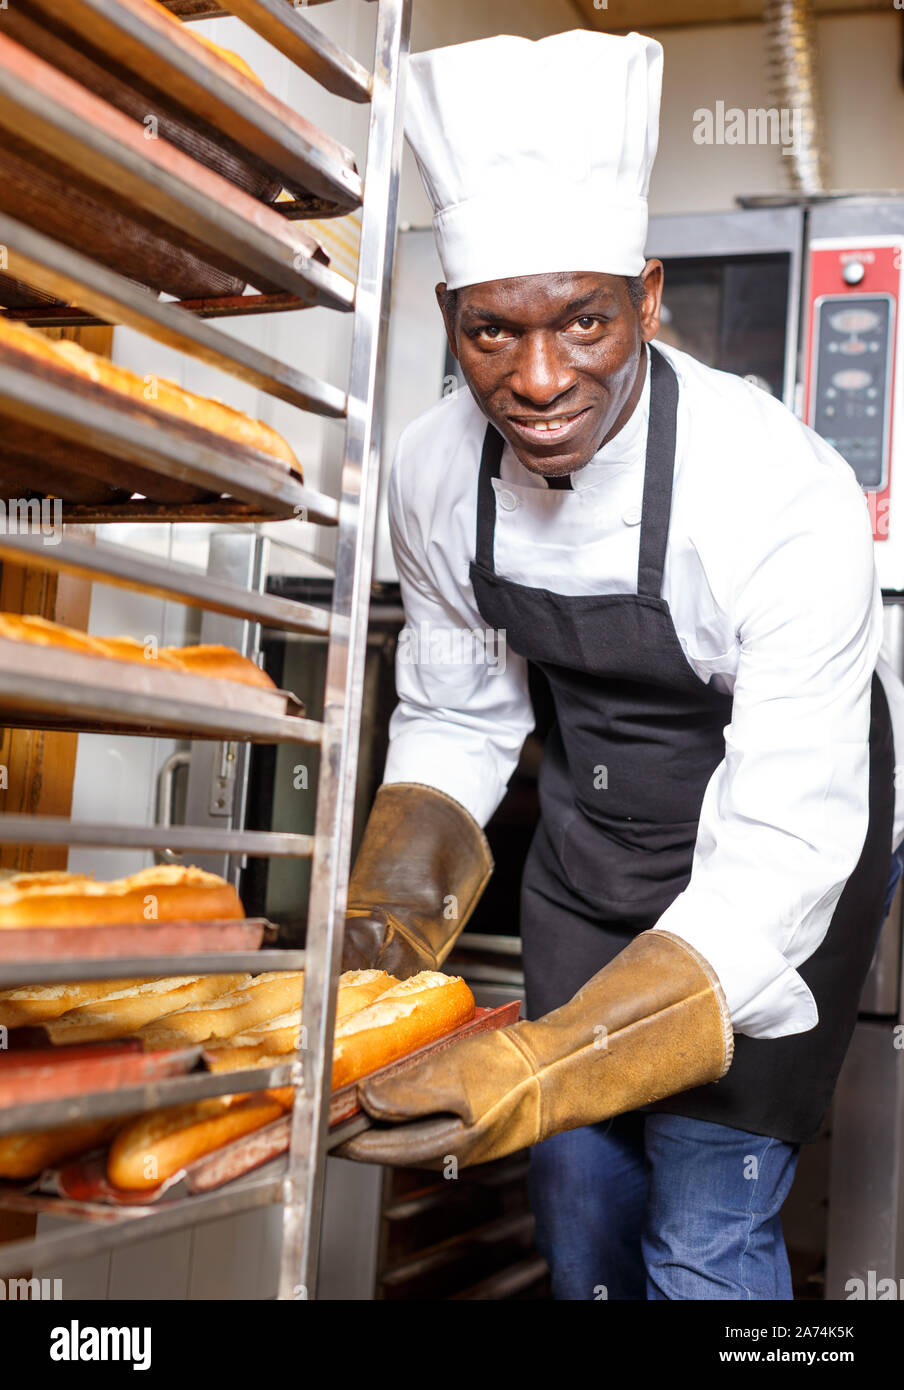 Confident worker of bakery wearing uniform and heat resistant gloves putting hot baked baguettes on tray rack Stock Photo